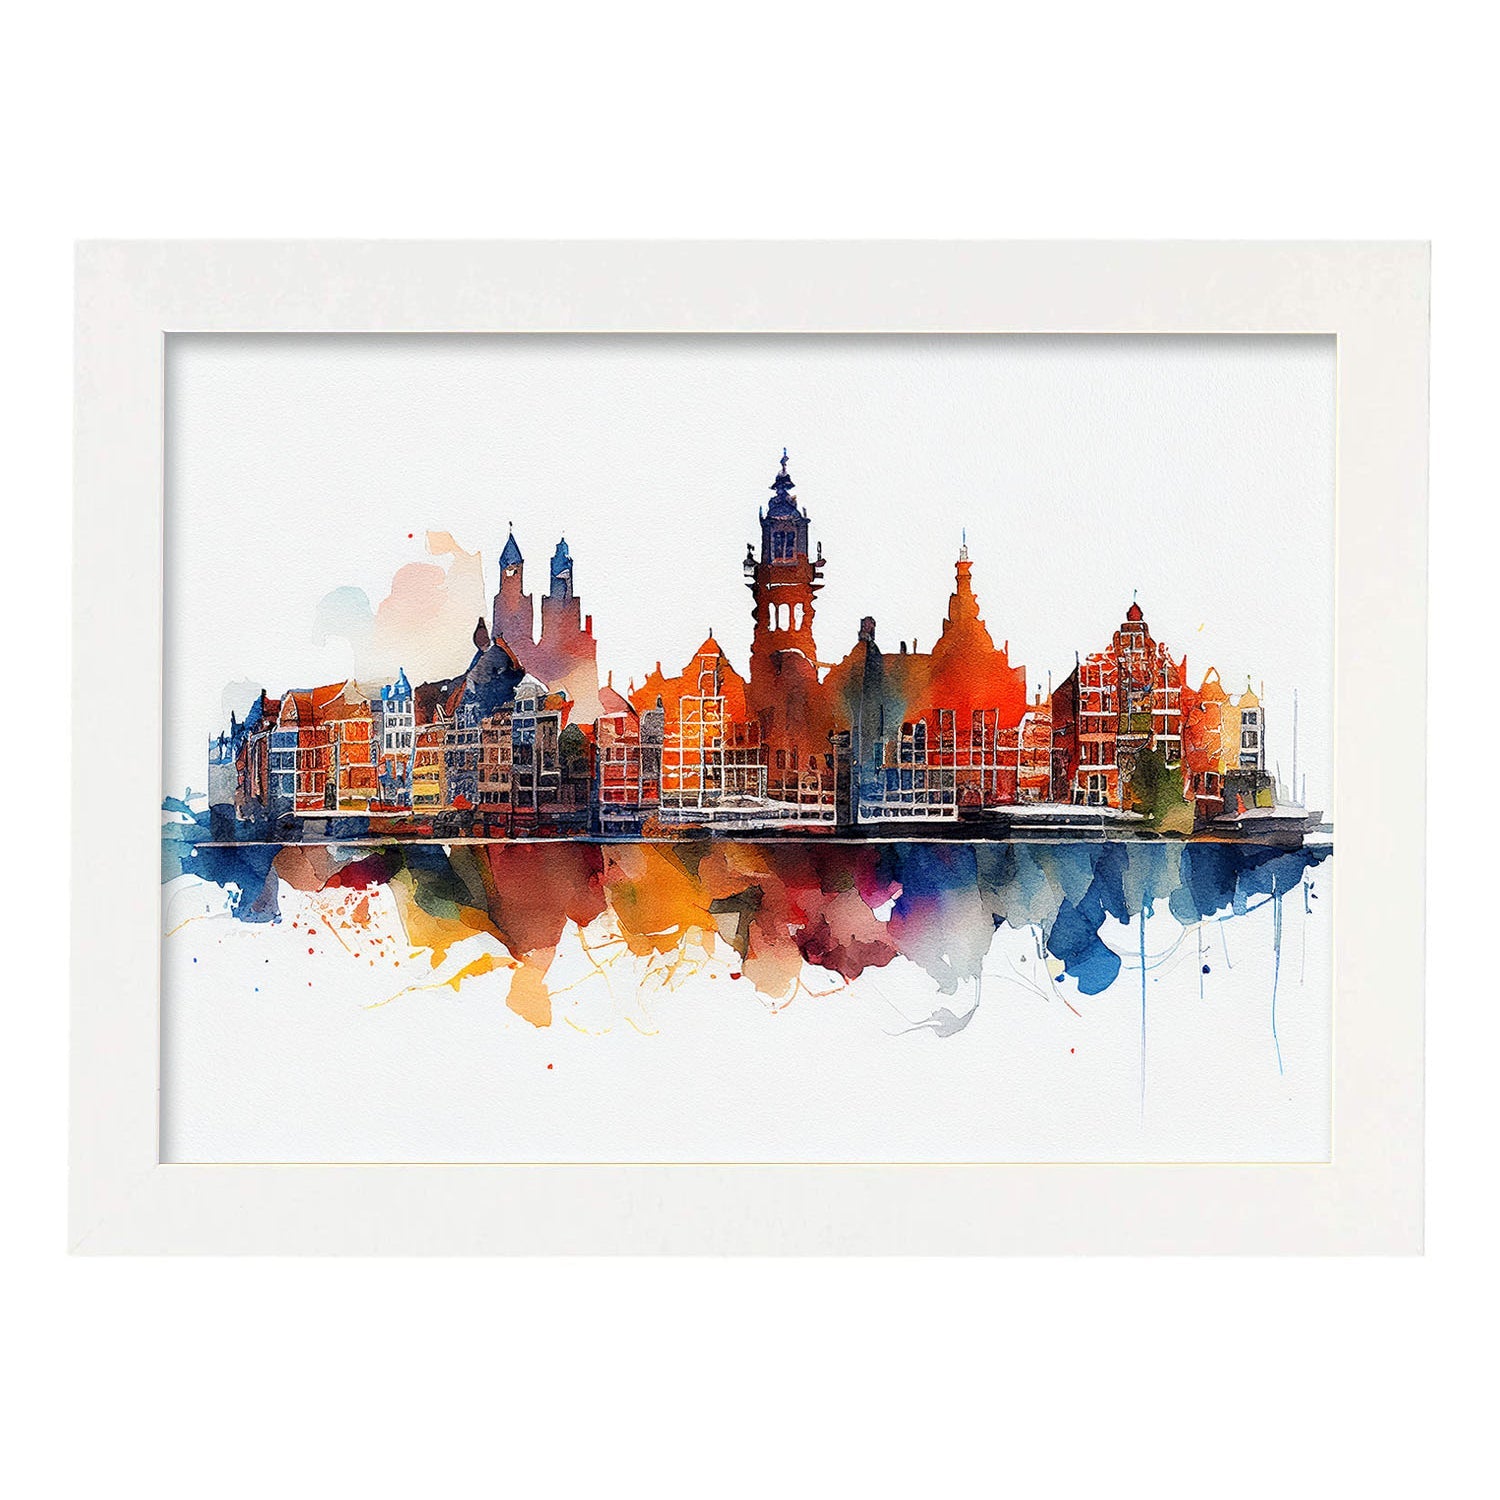 Nacnic watercolor of a skyline of the city of Amsterdam_4. Aesthetic Wall Art Prints for Bedroom or Living Room Design.-Artwork-Nacnic-A4-Marco Blanco-Nacnic Estudio SL